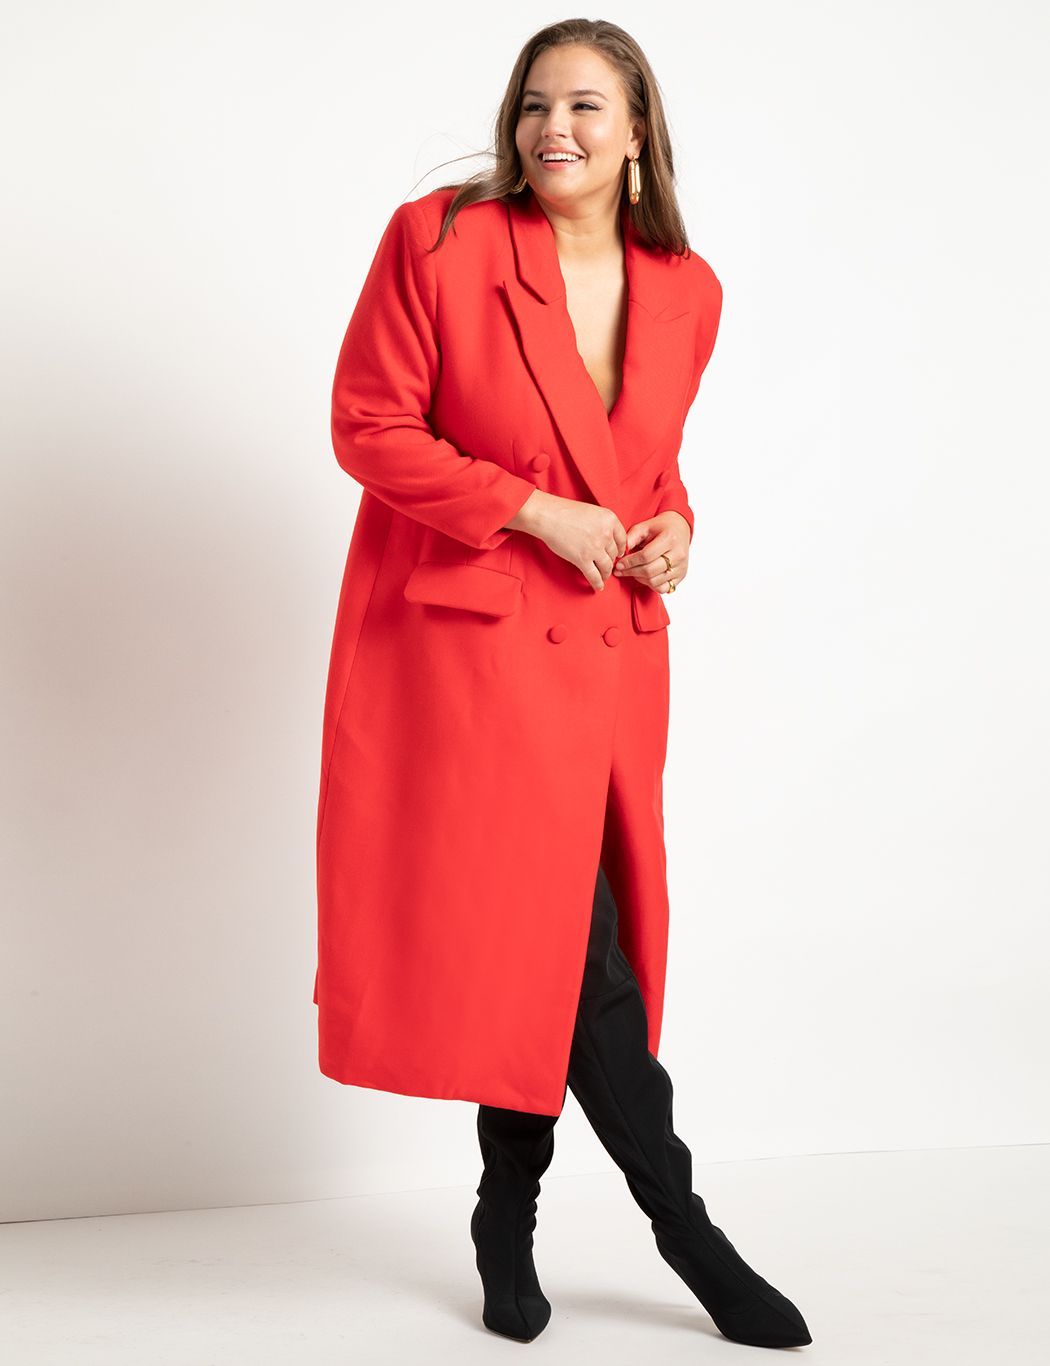 Strong Shoulder Coat With Cinched Waist | Women's Plus Size Coats + Jackets | ELOQUII | Eloquii